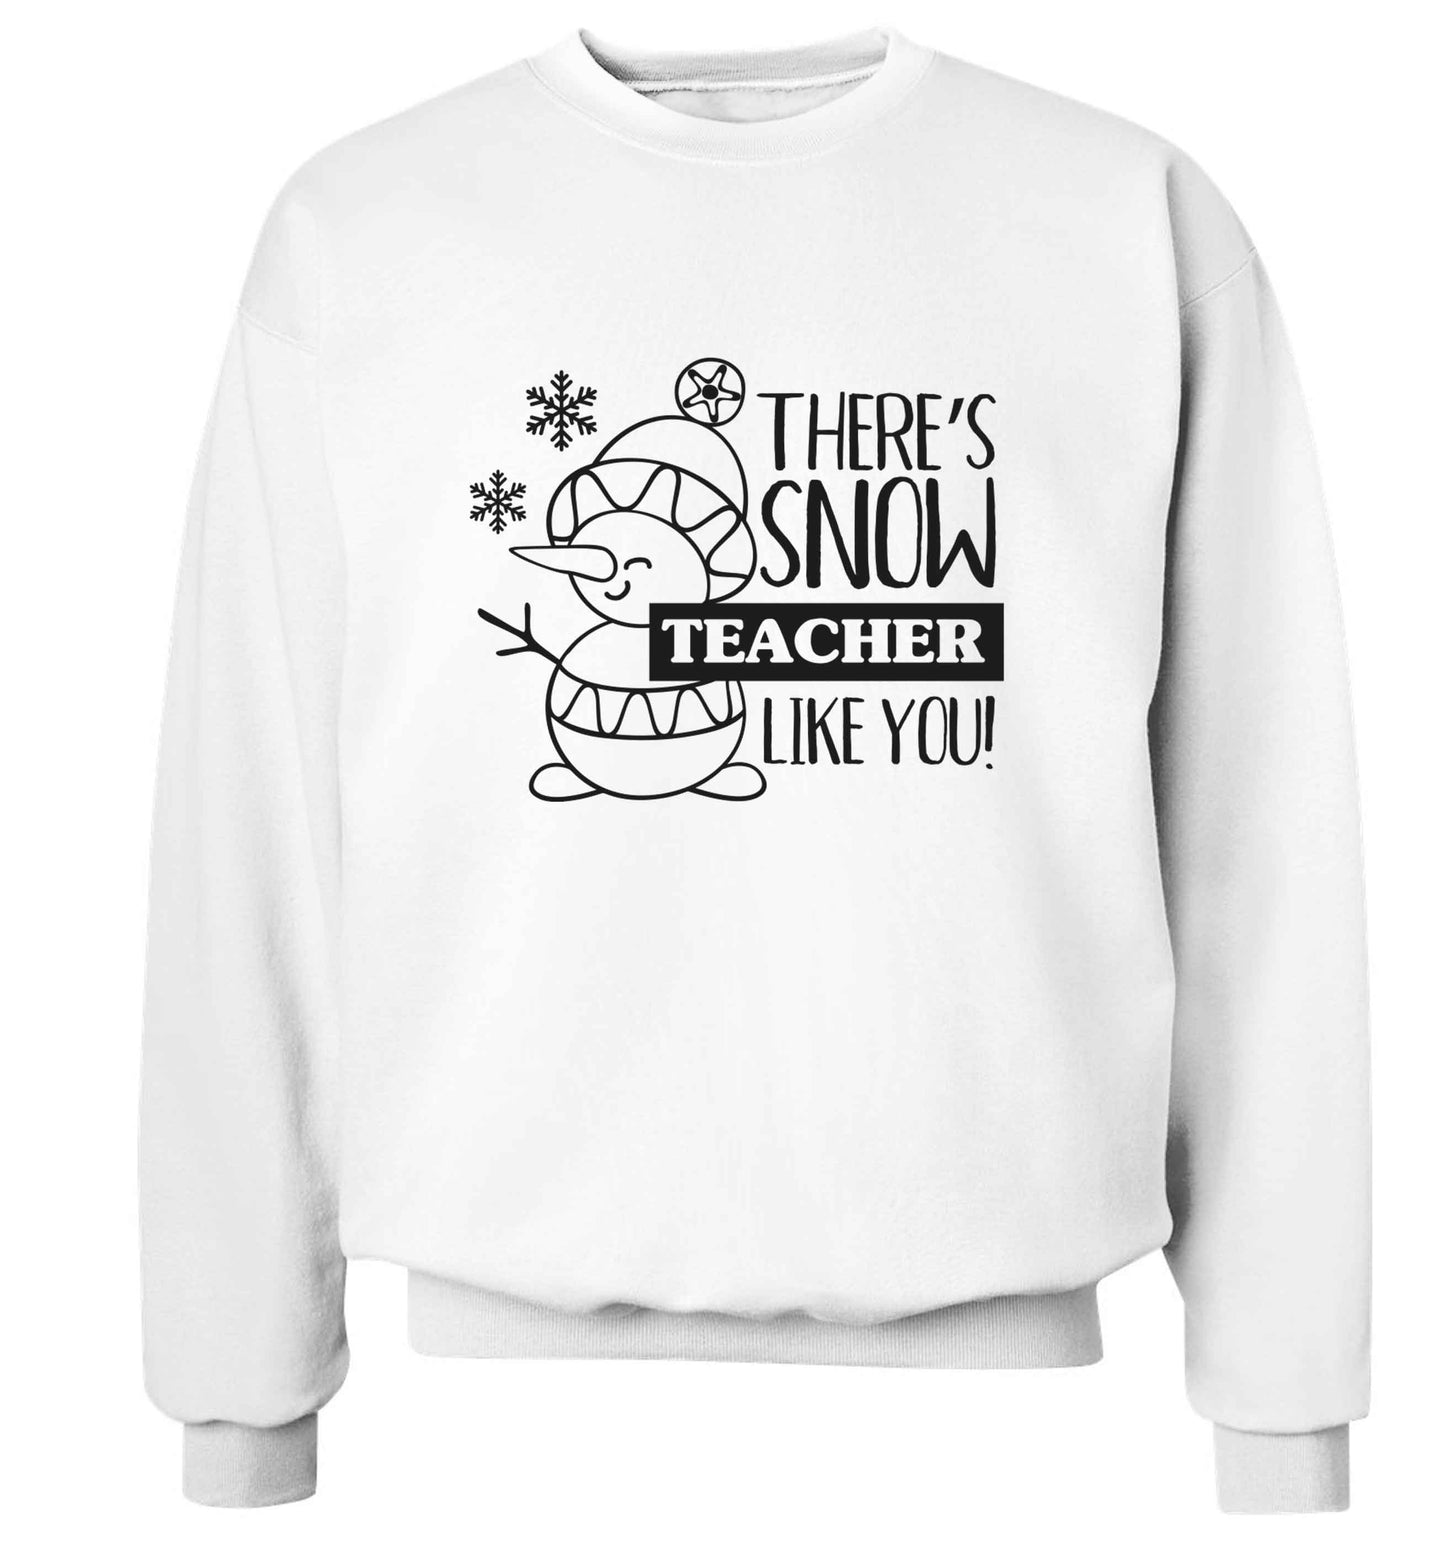 There's snow teacher like you adult's unisex white sweater 2XL